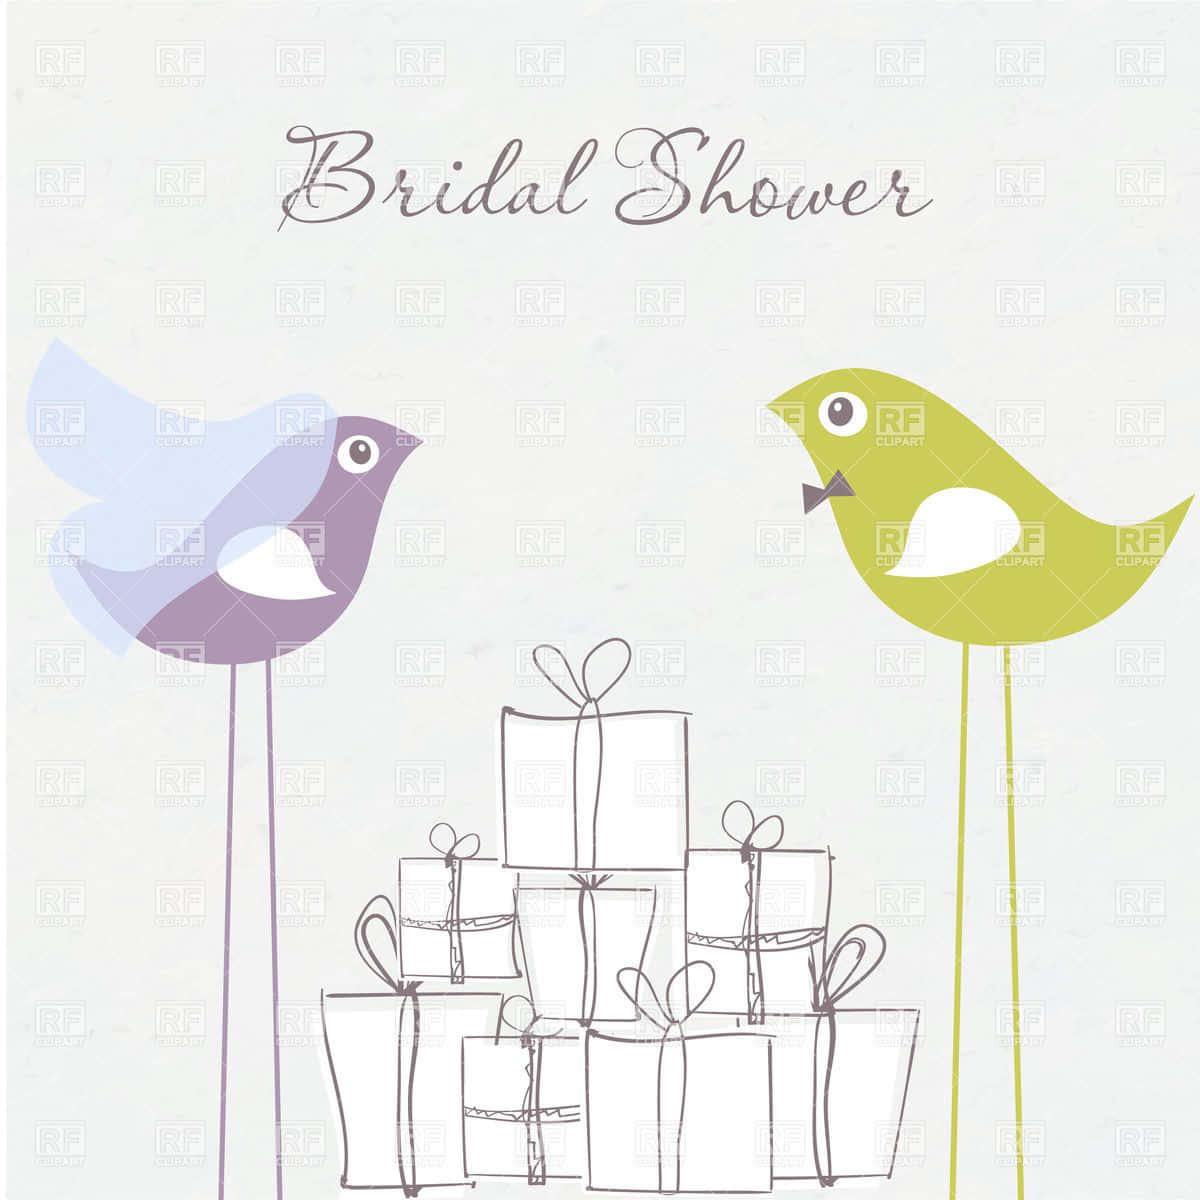 Host a perfect bridal shower celebration with beautiful decorations